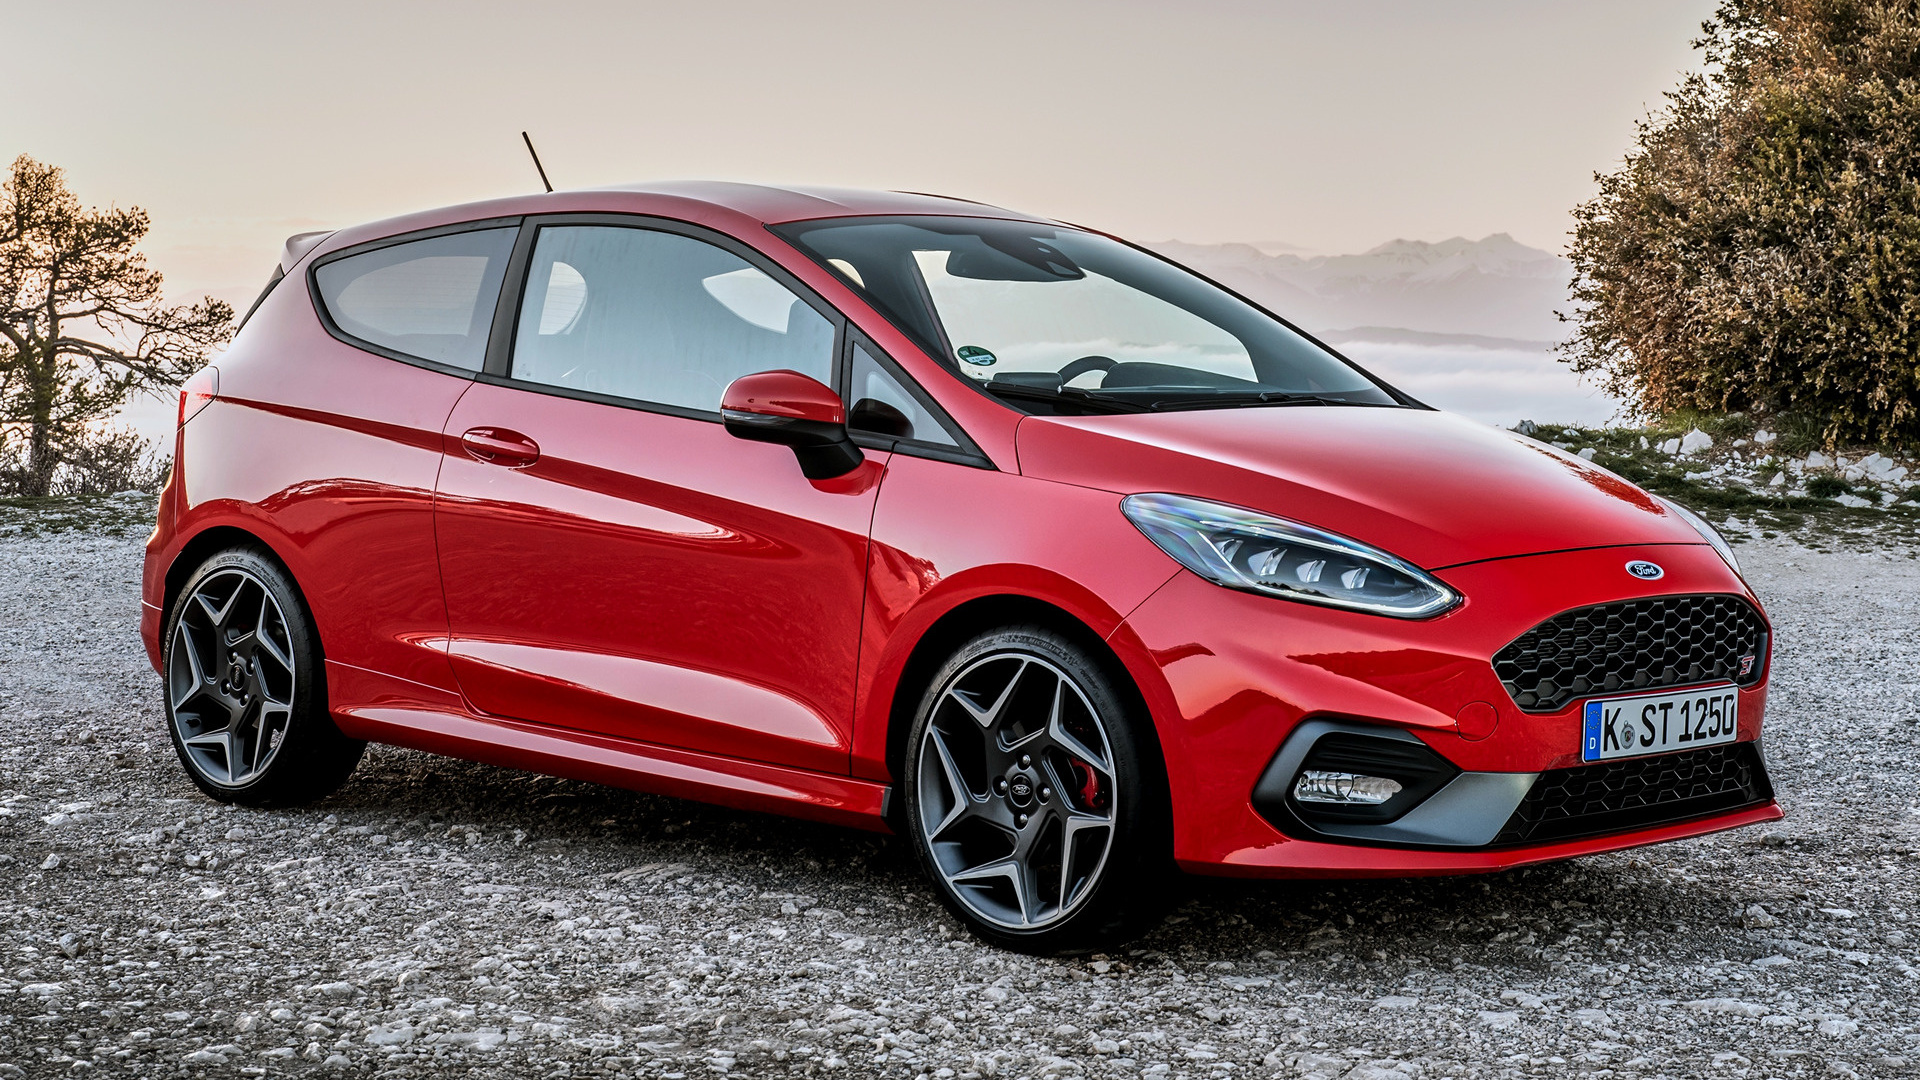 2018 Ford Fiesta ST 3-door - Wallpapers and HD Images ...